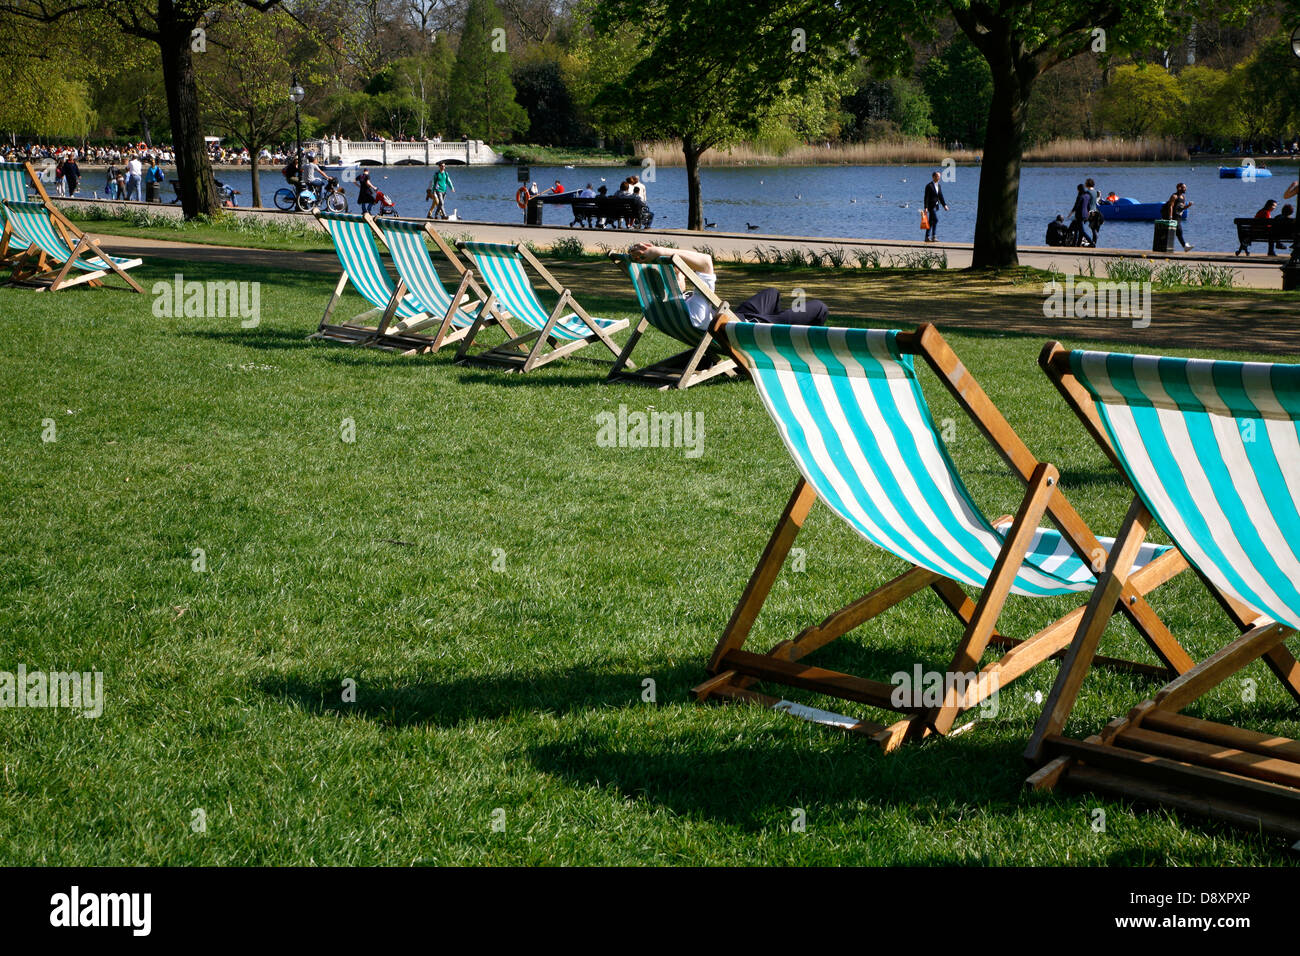 Deckchairs in front of the Serpentine, Hyde Park, London, UK Stock Photo